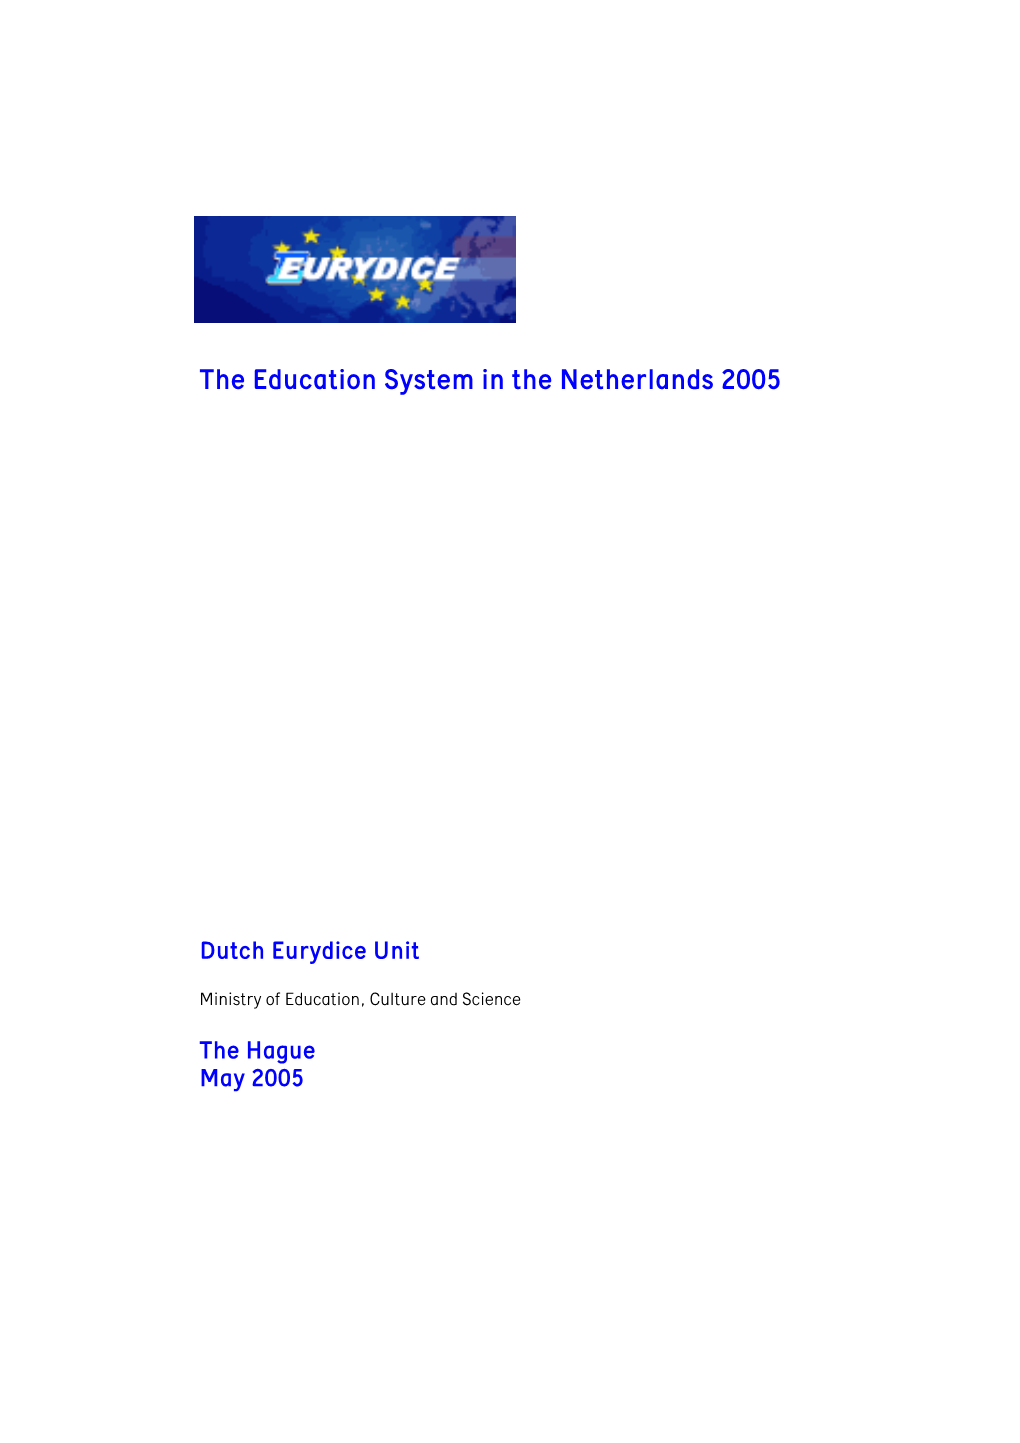 The Education System in the Netherlands 2005